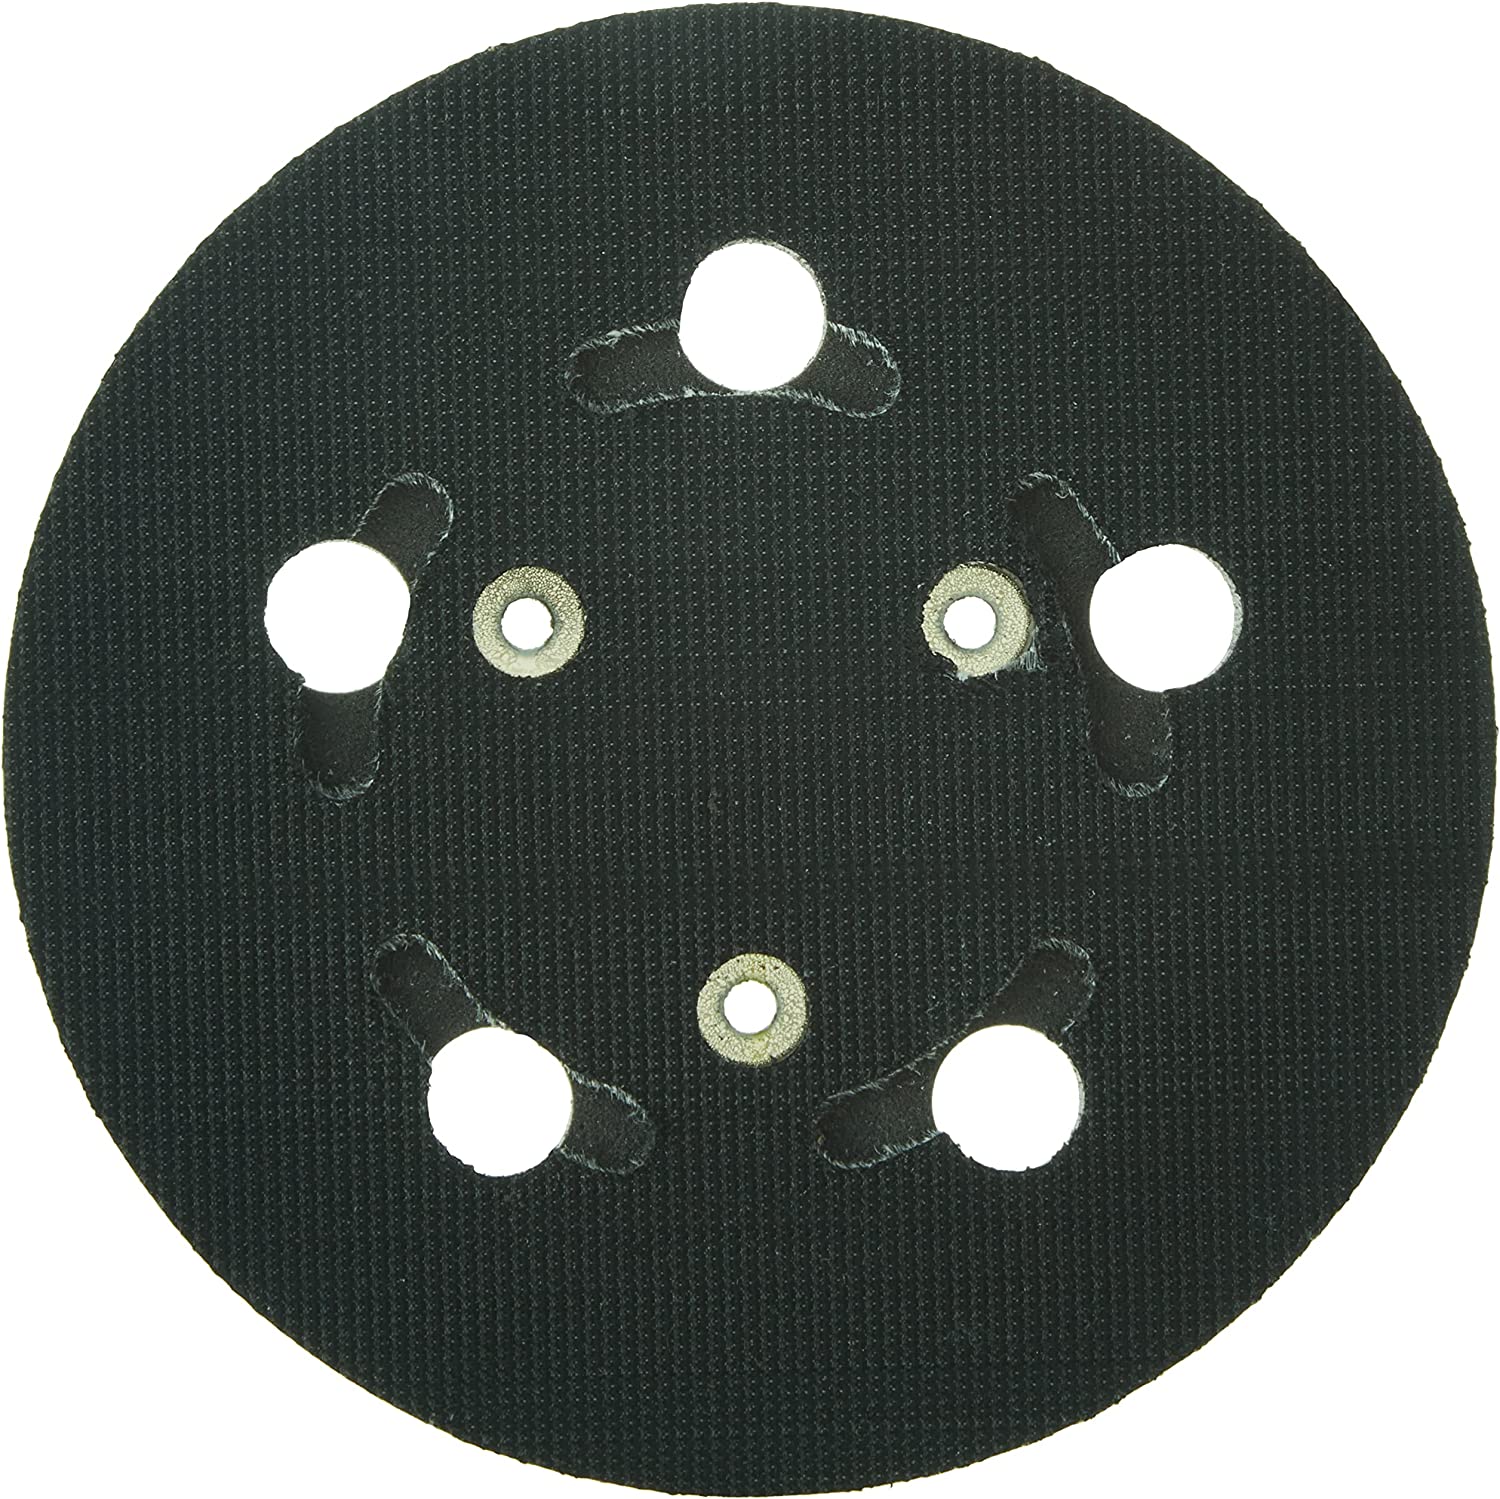 PORTER-CABLE Hook And Loop Pad for Model 333VS Sander, [...]